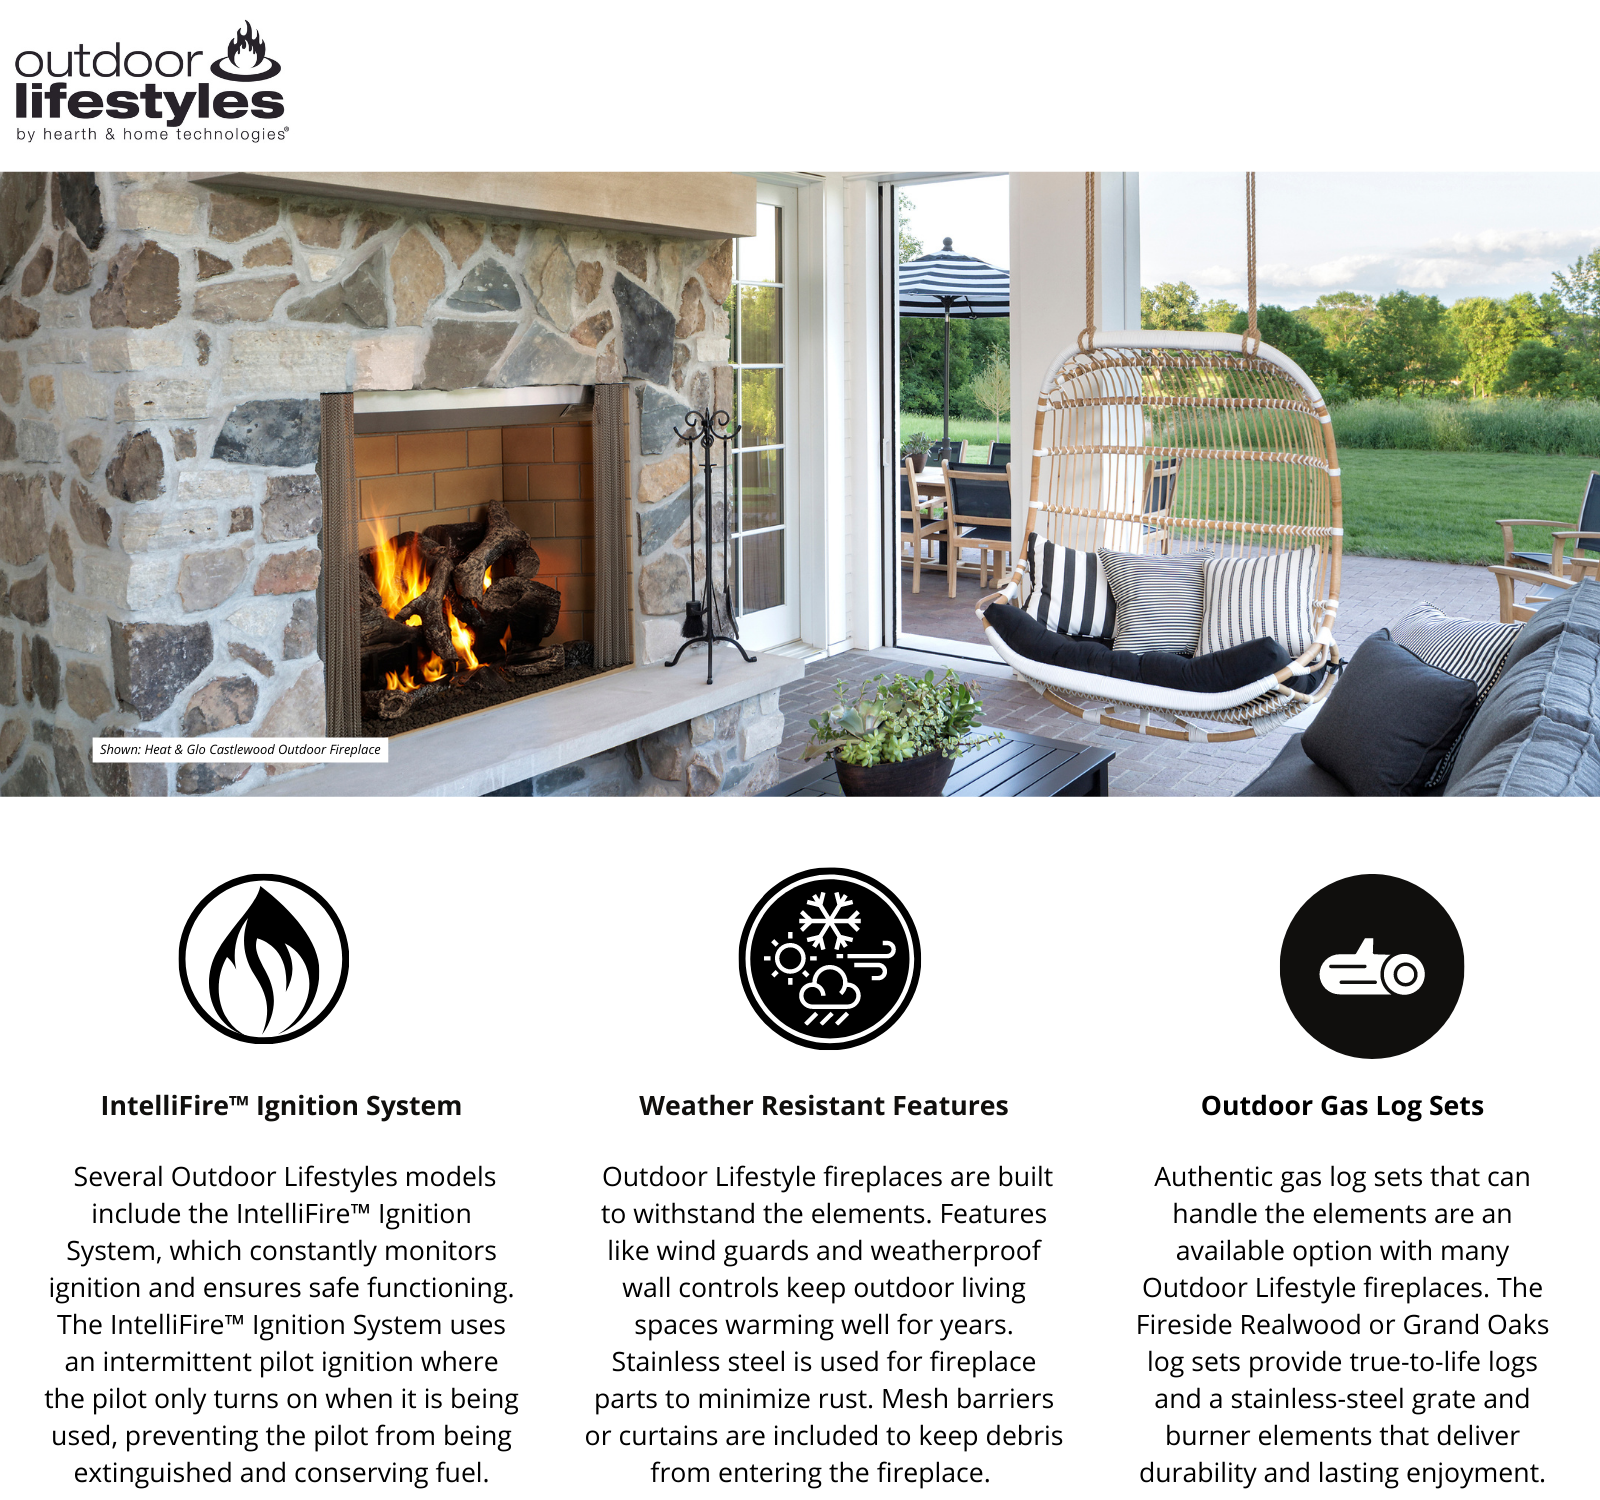 outdoor lifestyles exterior wood and gas fireplaces